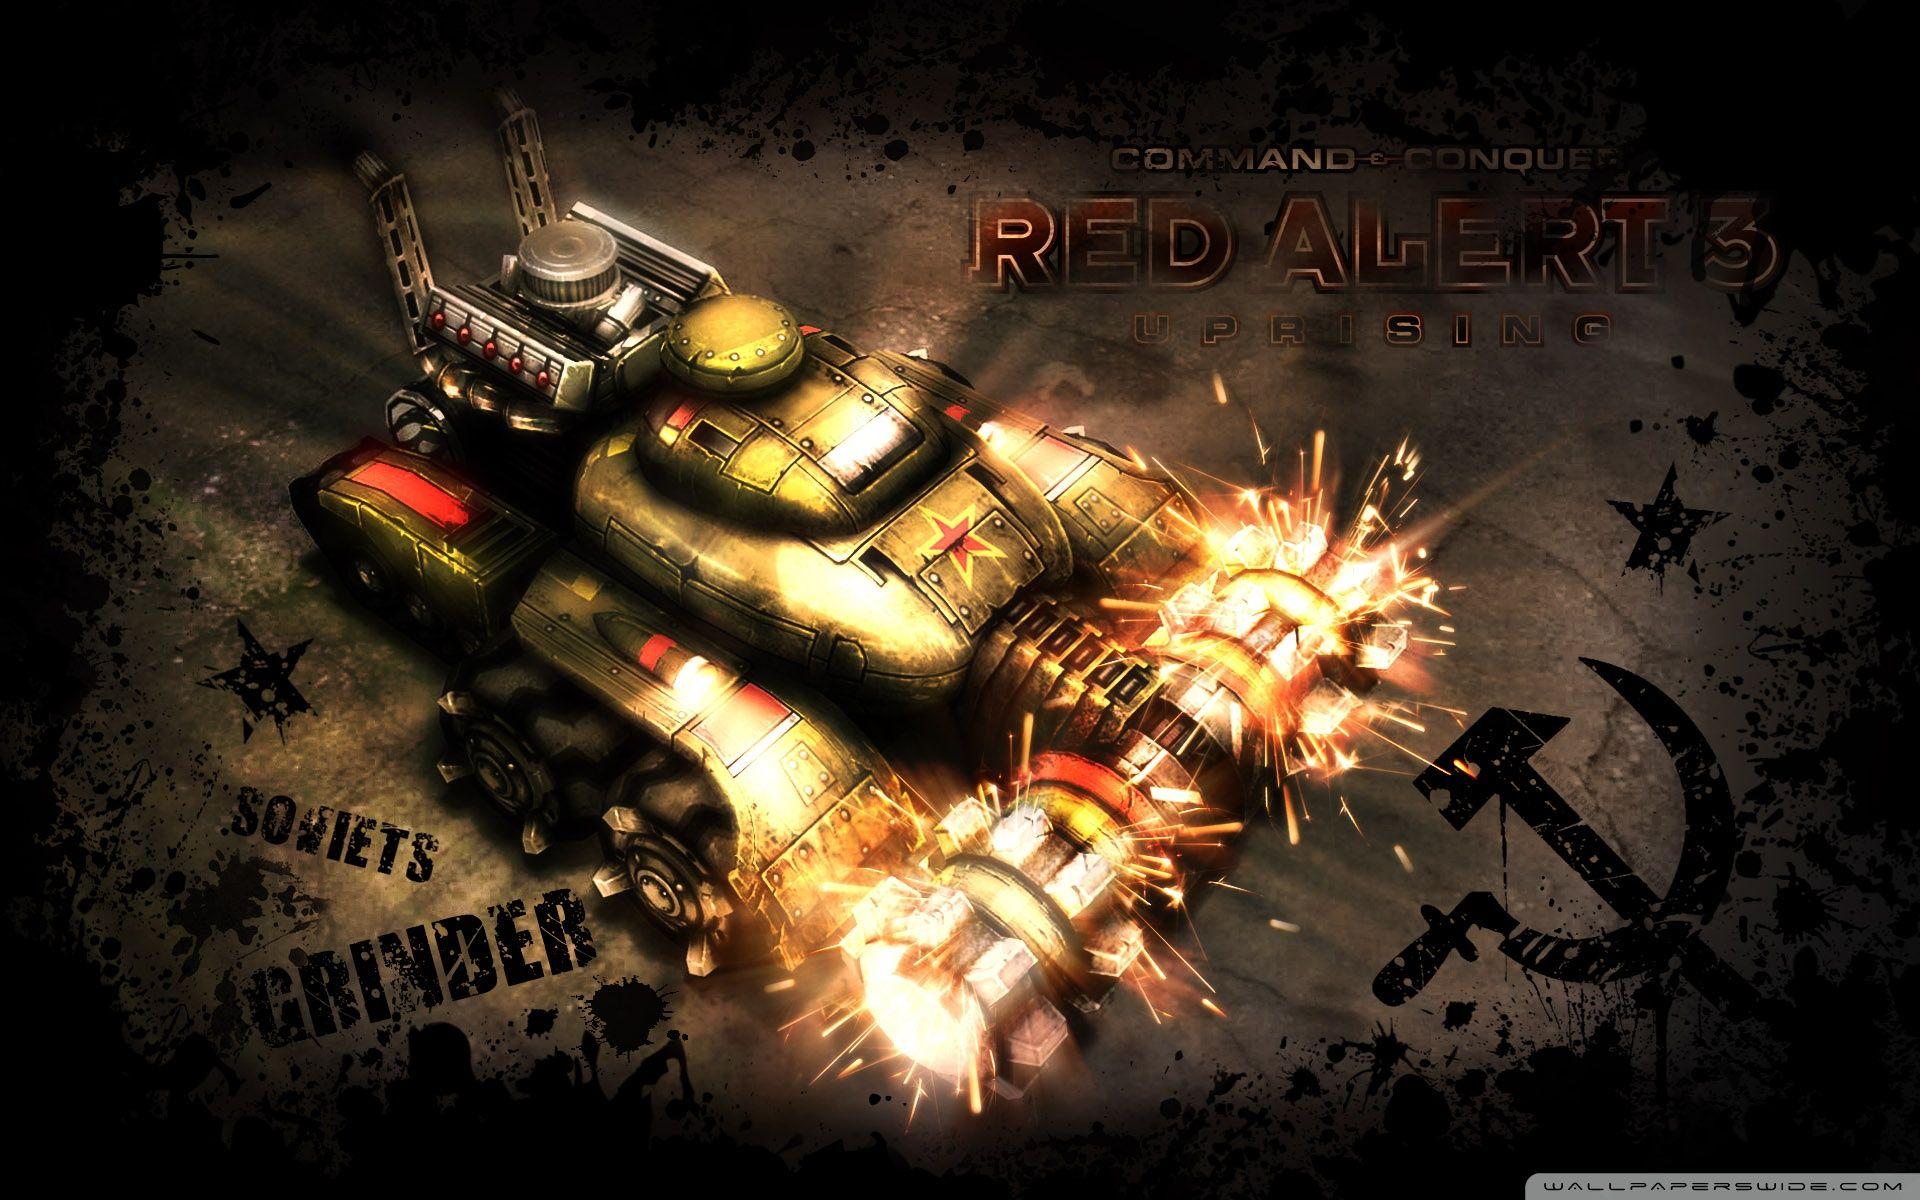 command and conquer red alert 2 wallpaper